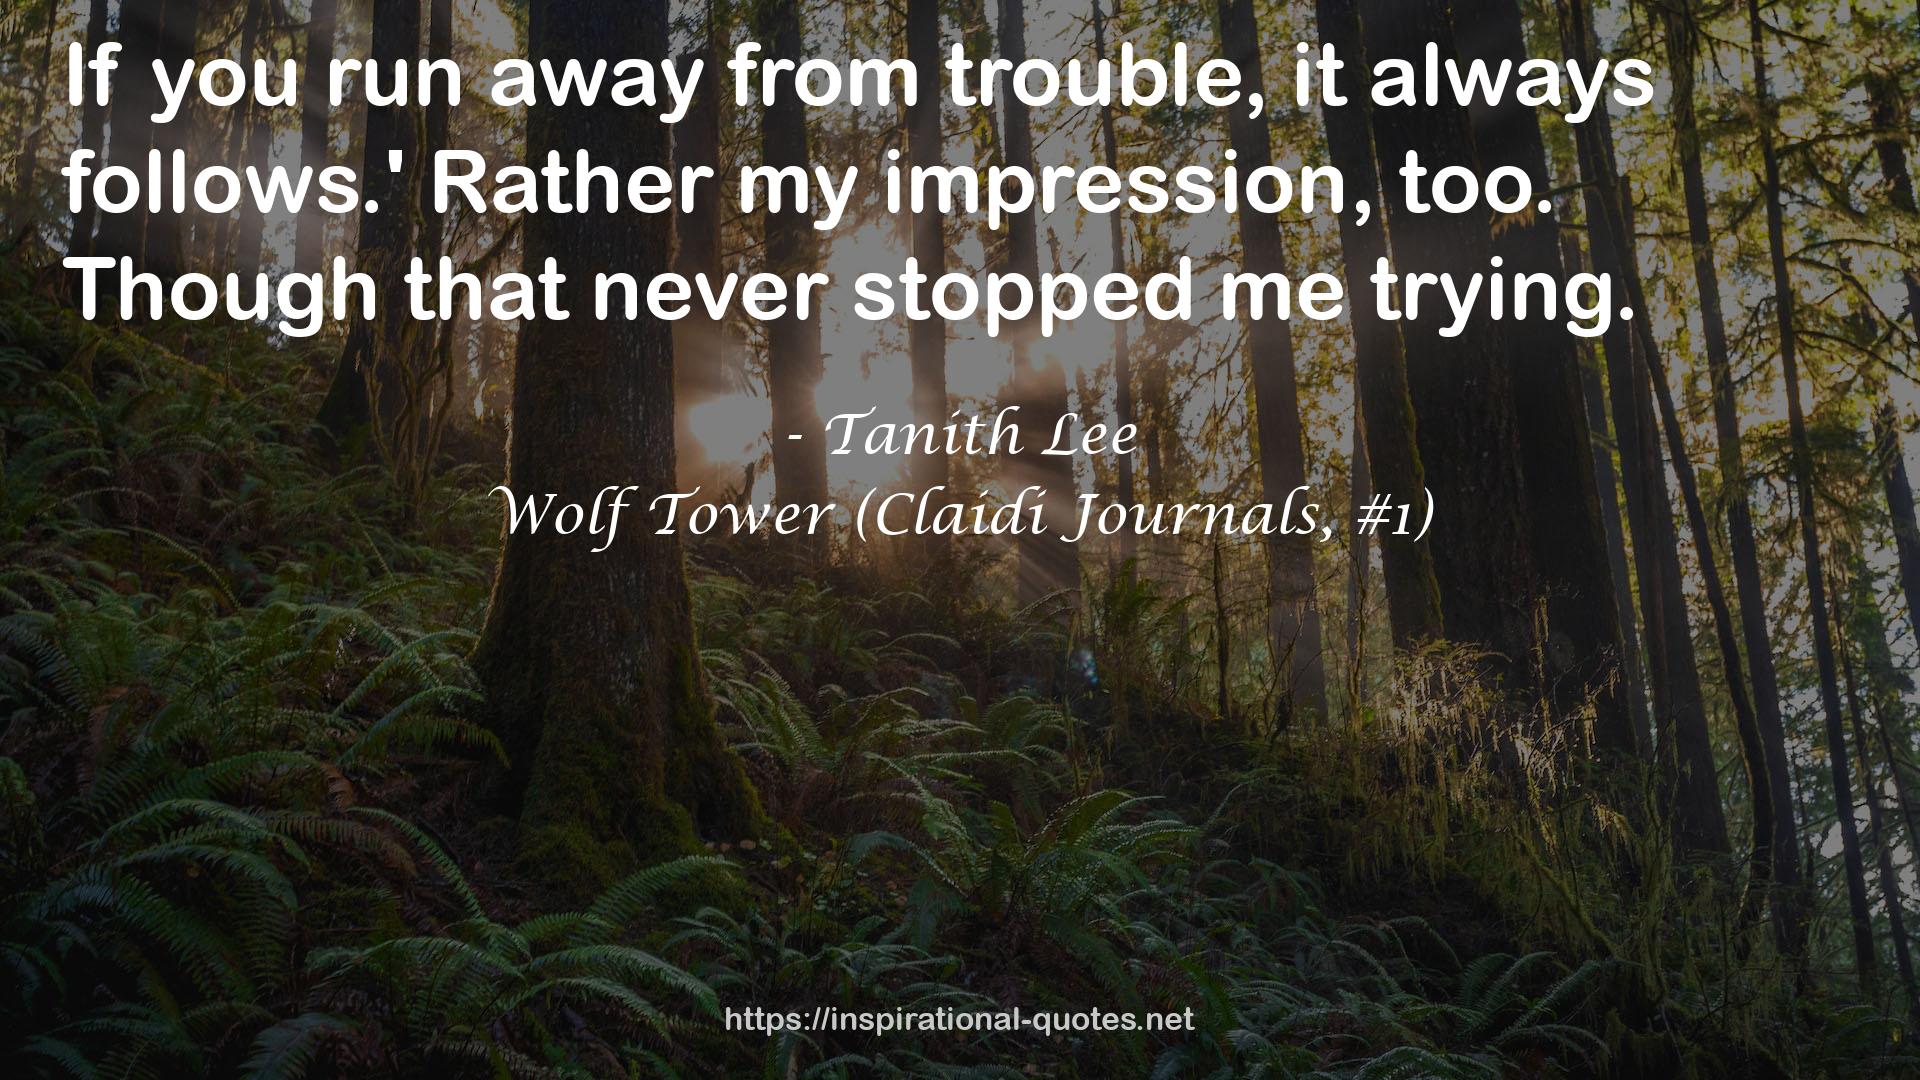 Wolf Tower (Claidi Journals, #1) QUOTES